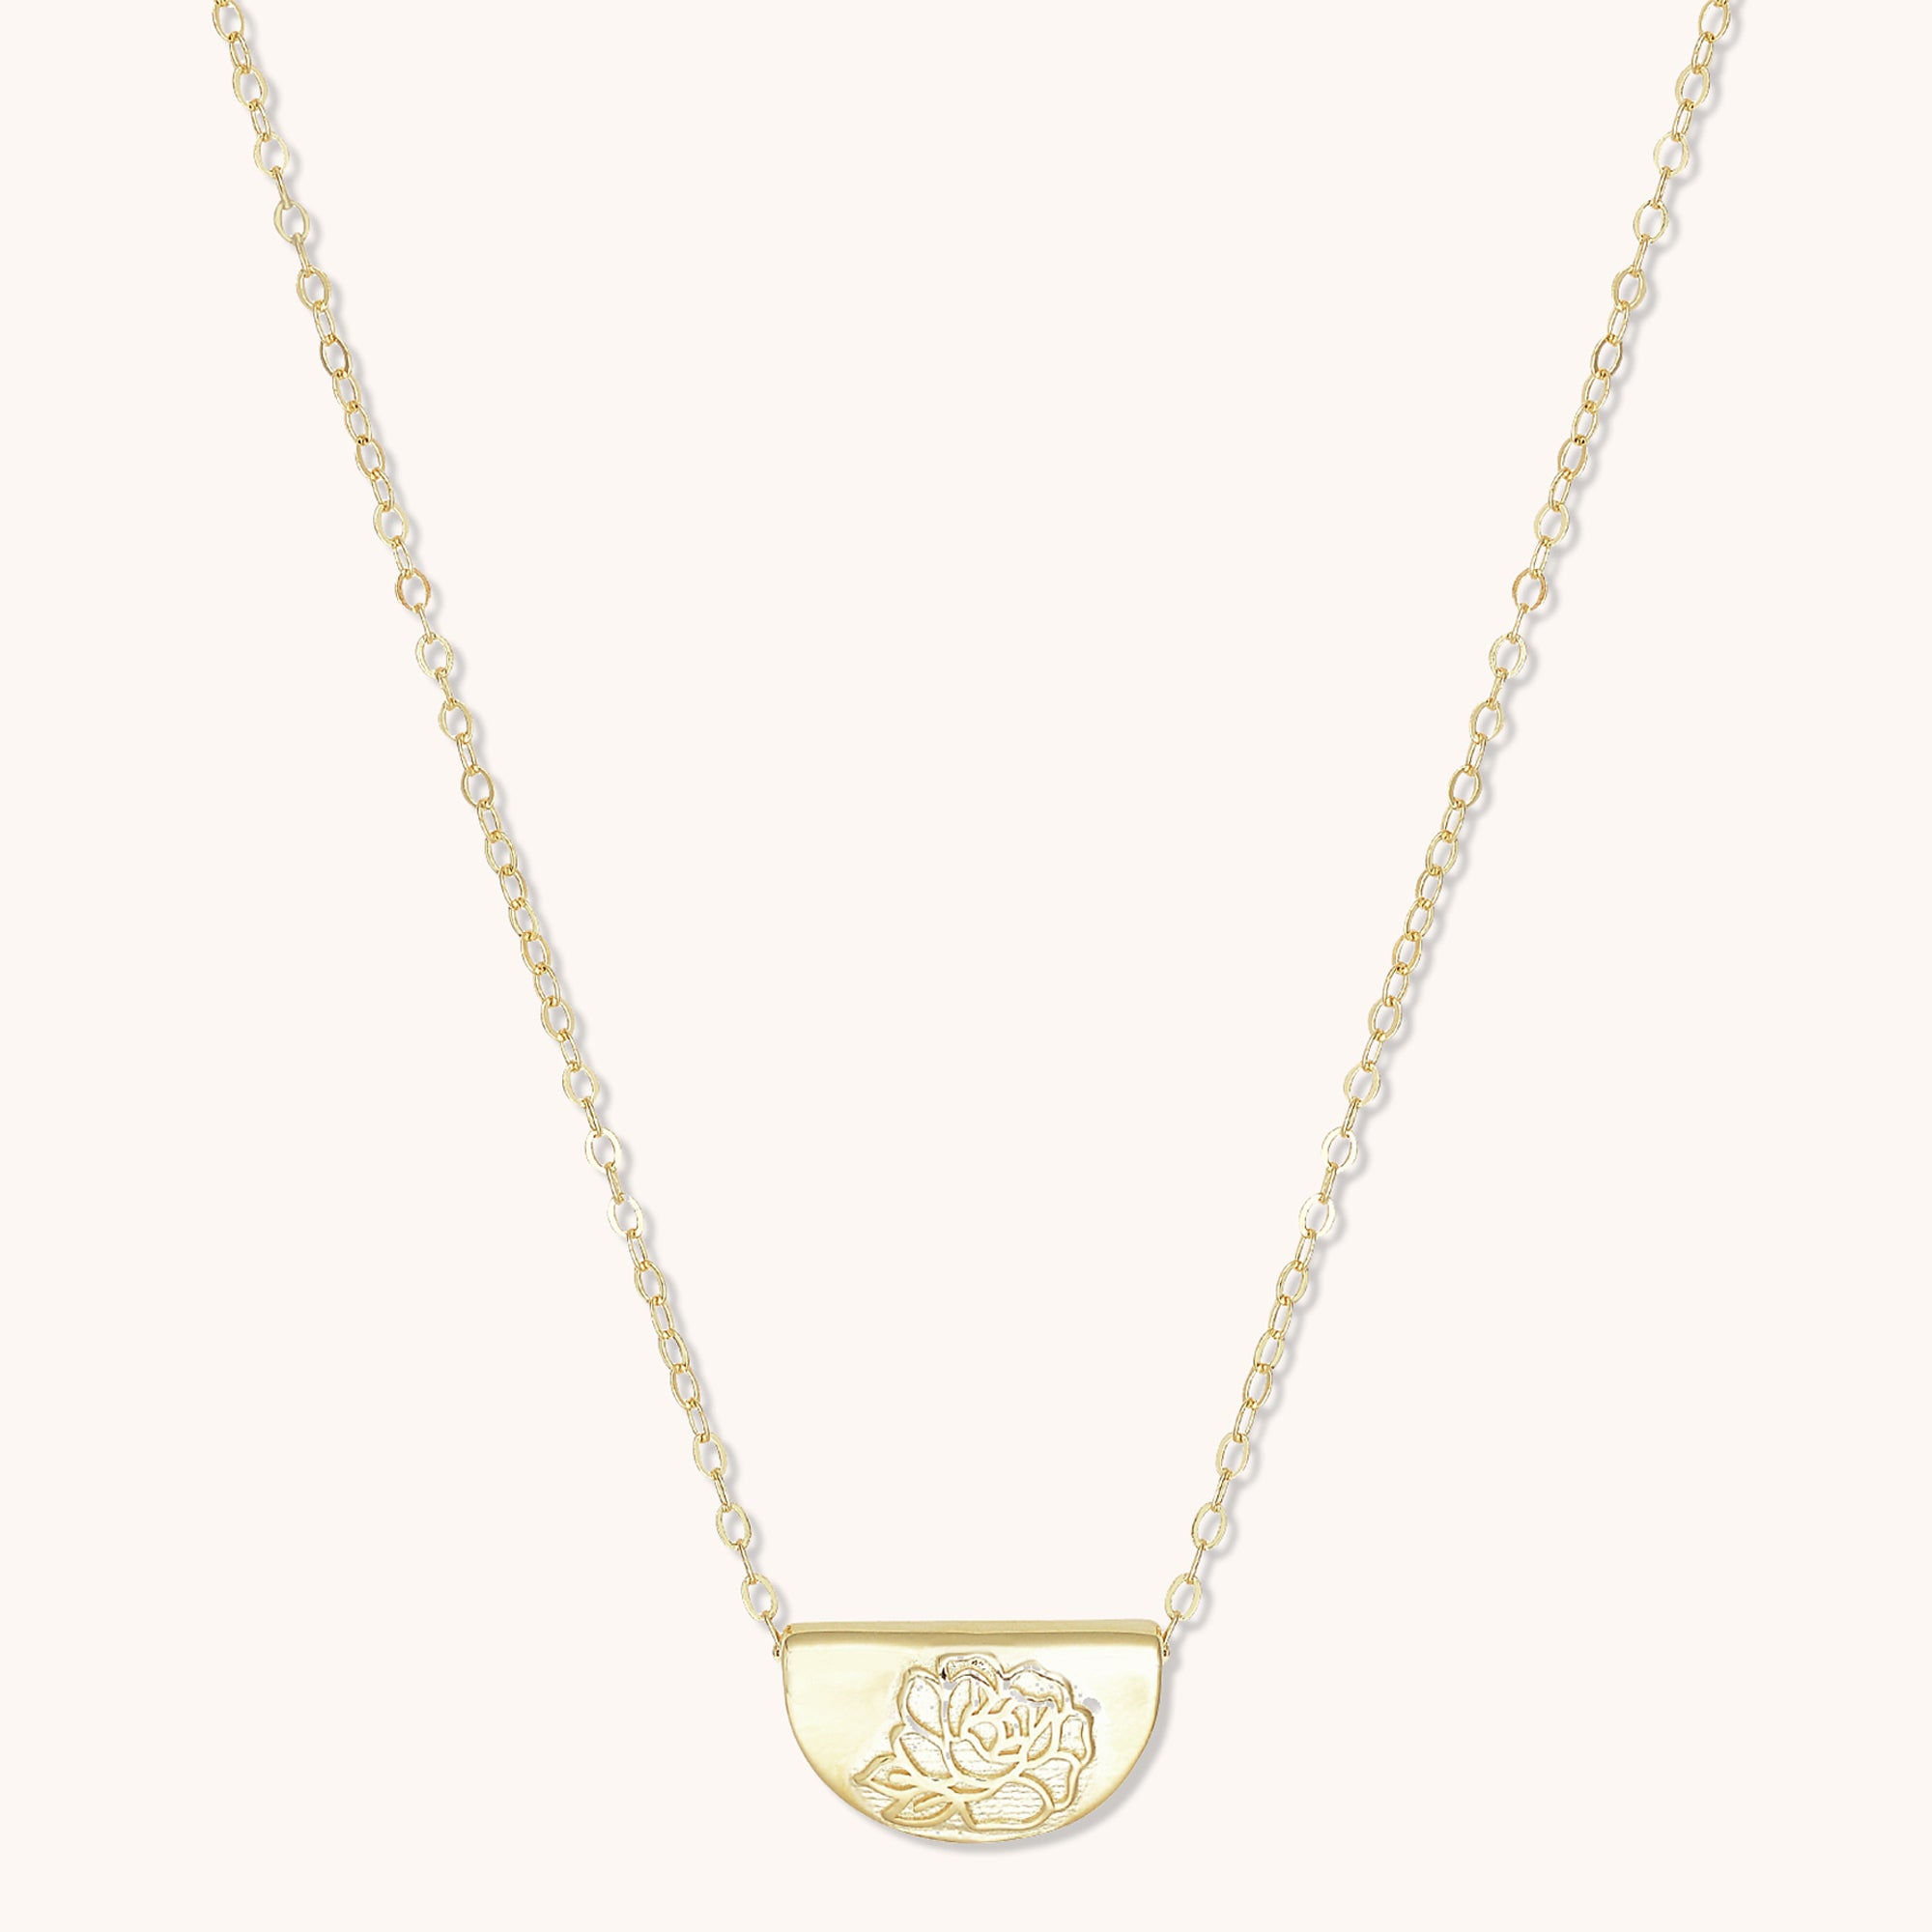 Birth Flower Necklace September (Peony) Gold